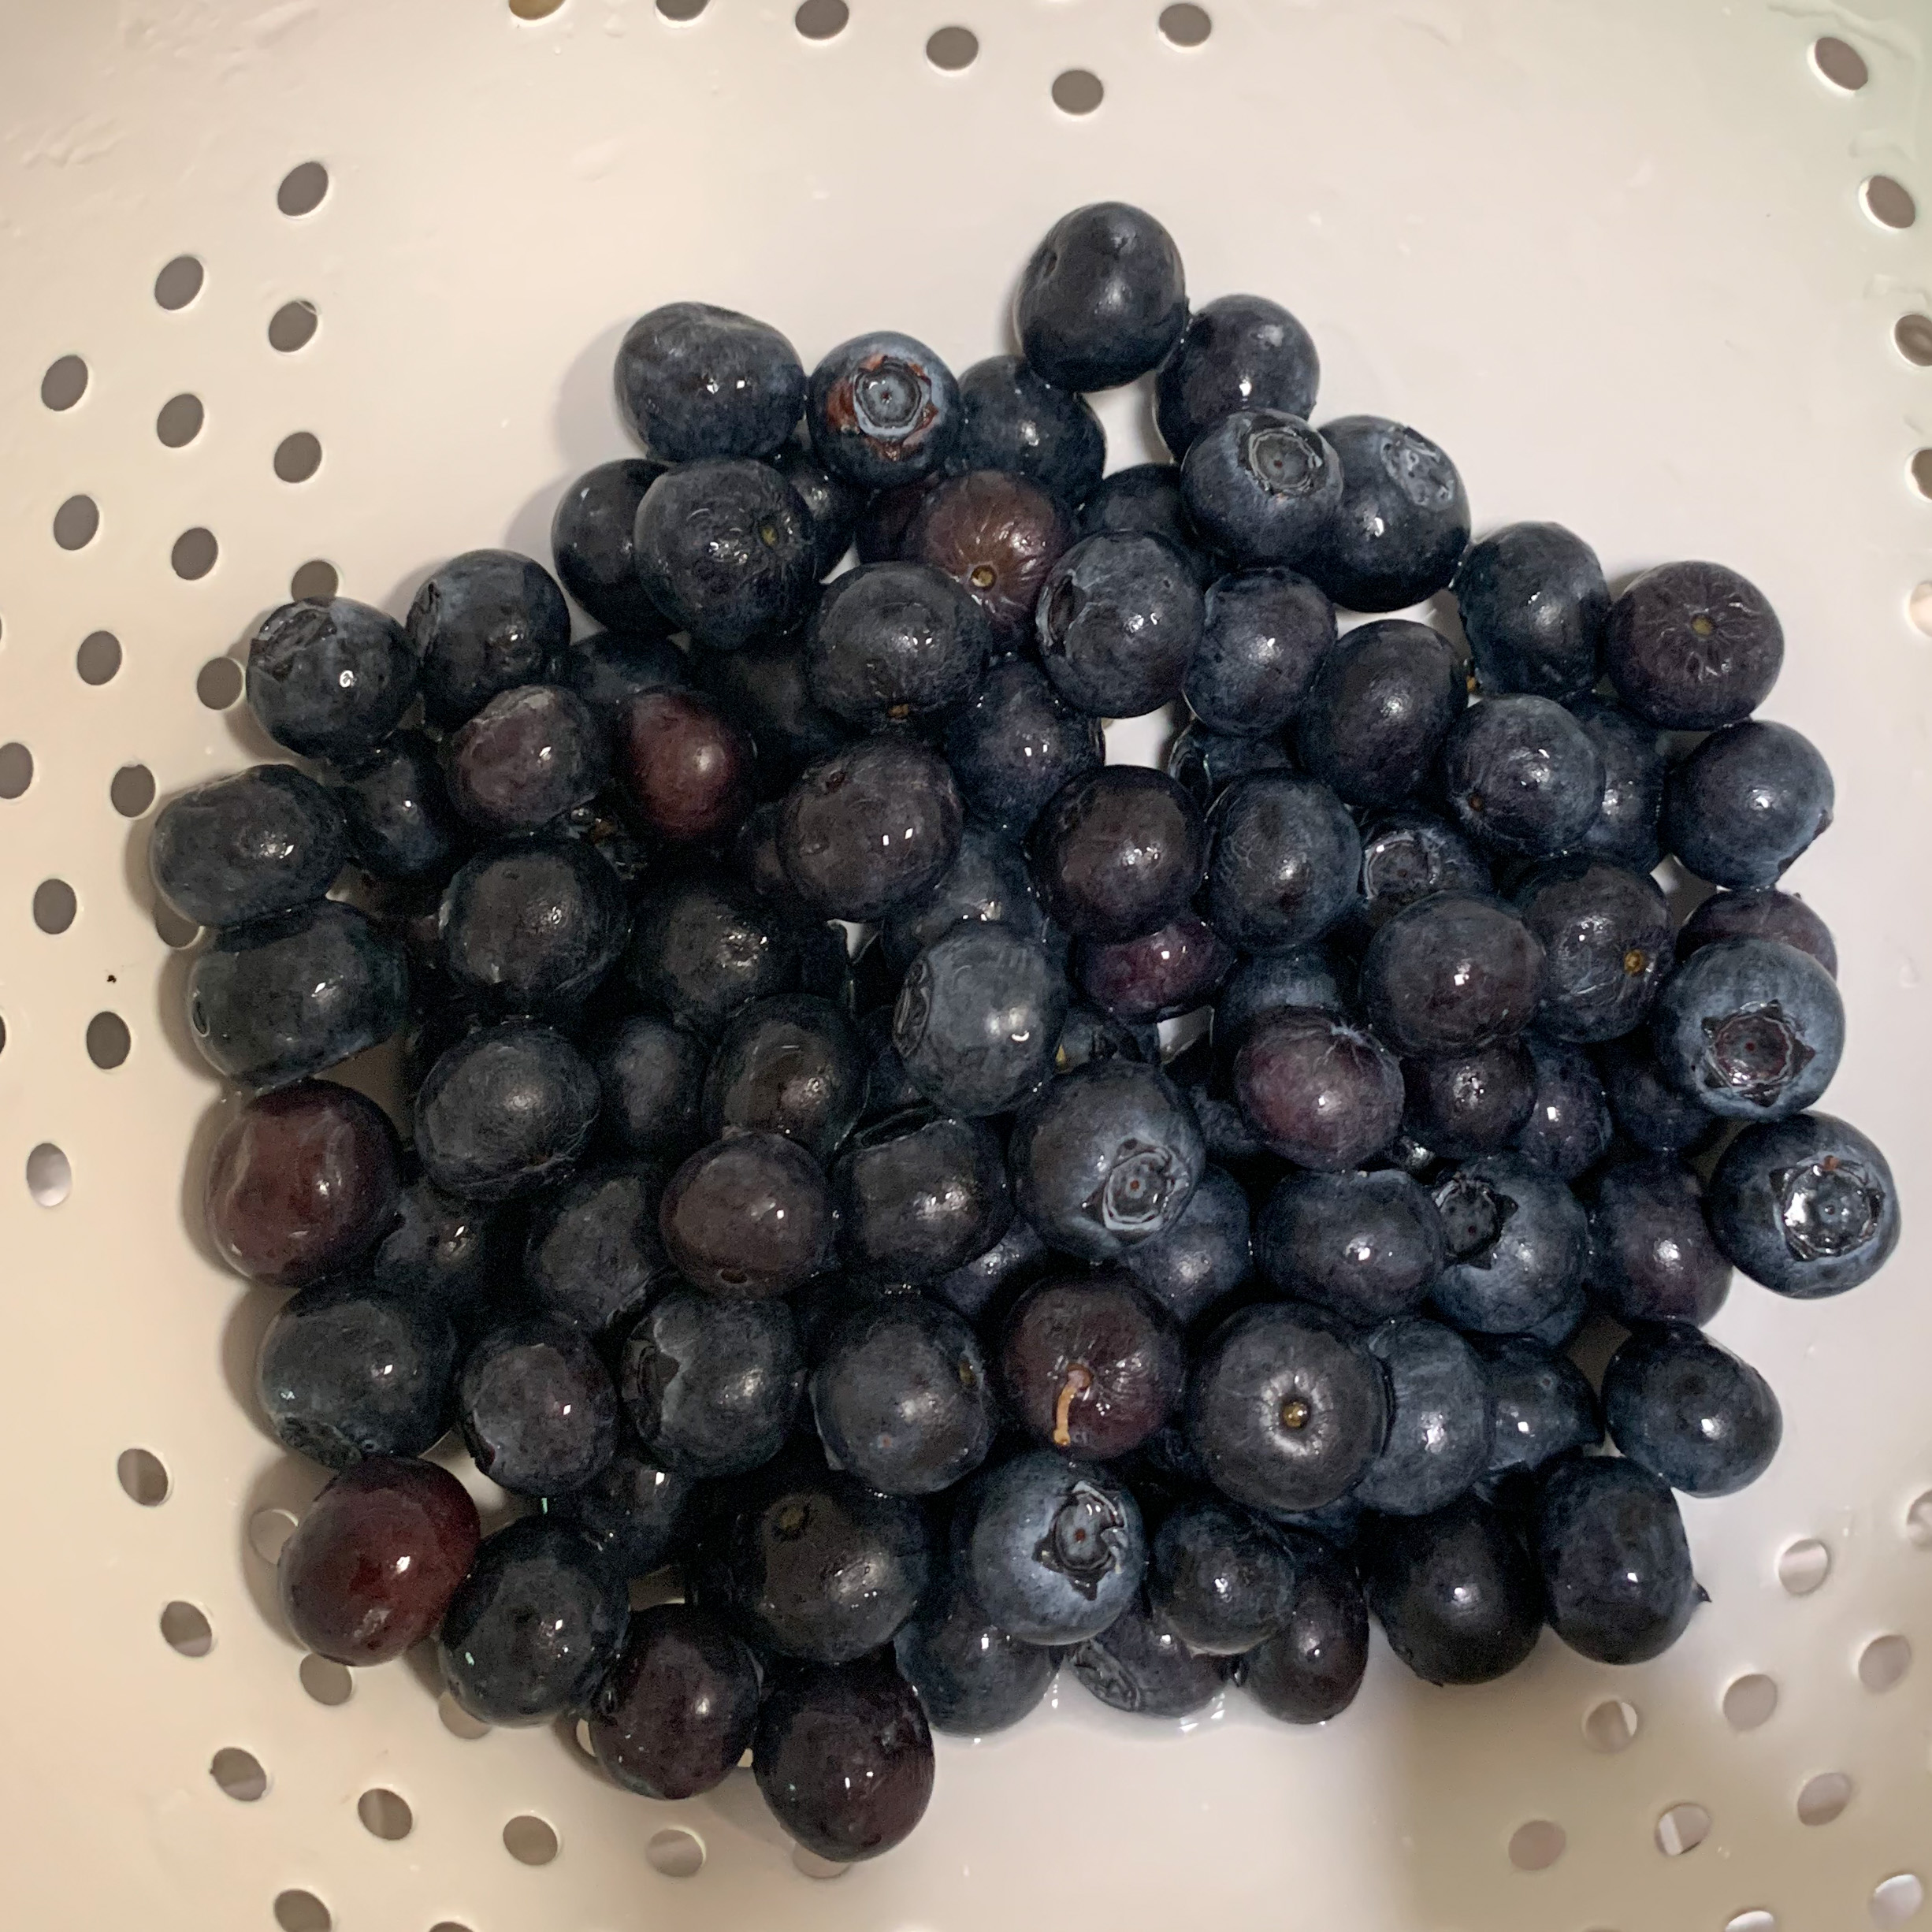 cleaned blueberries in a colander